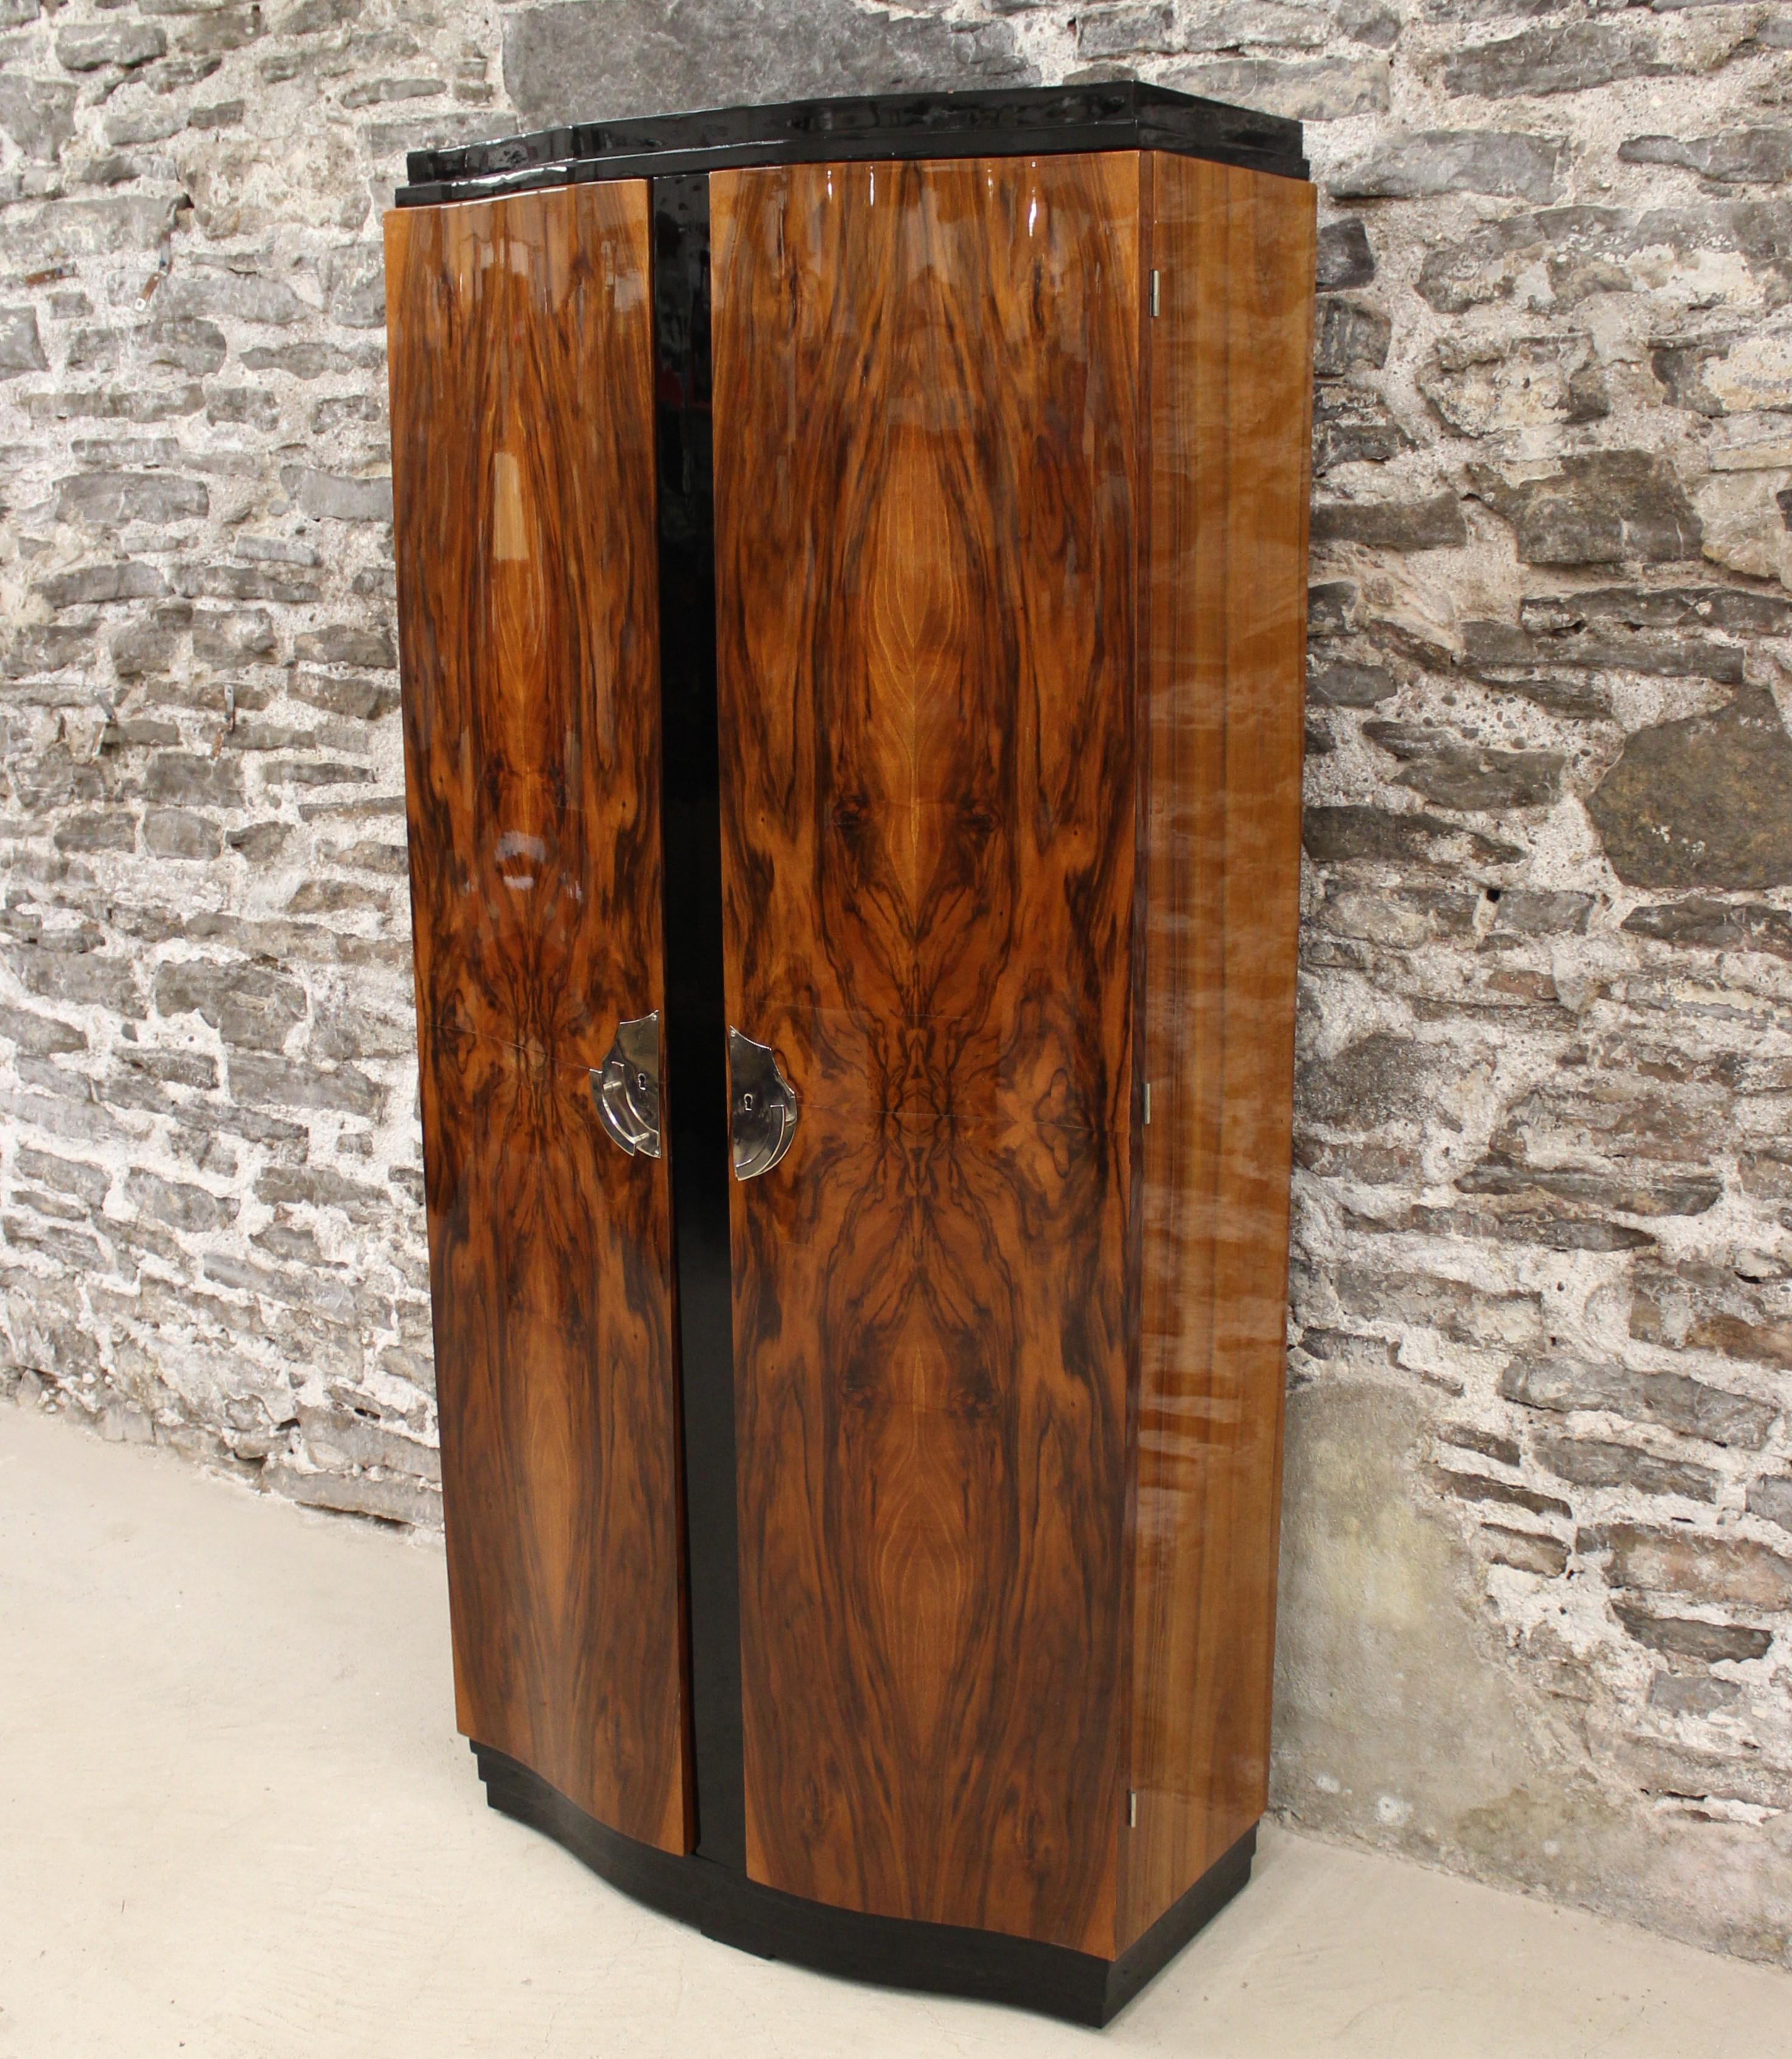 This Art Deco two-door armoire features ebonized trim on bow front, high gloss walnut doors and frame. It is done in the manner of Emile Jacques Ruhlmann.